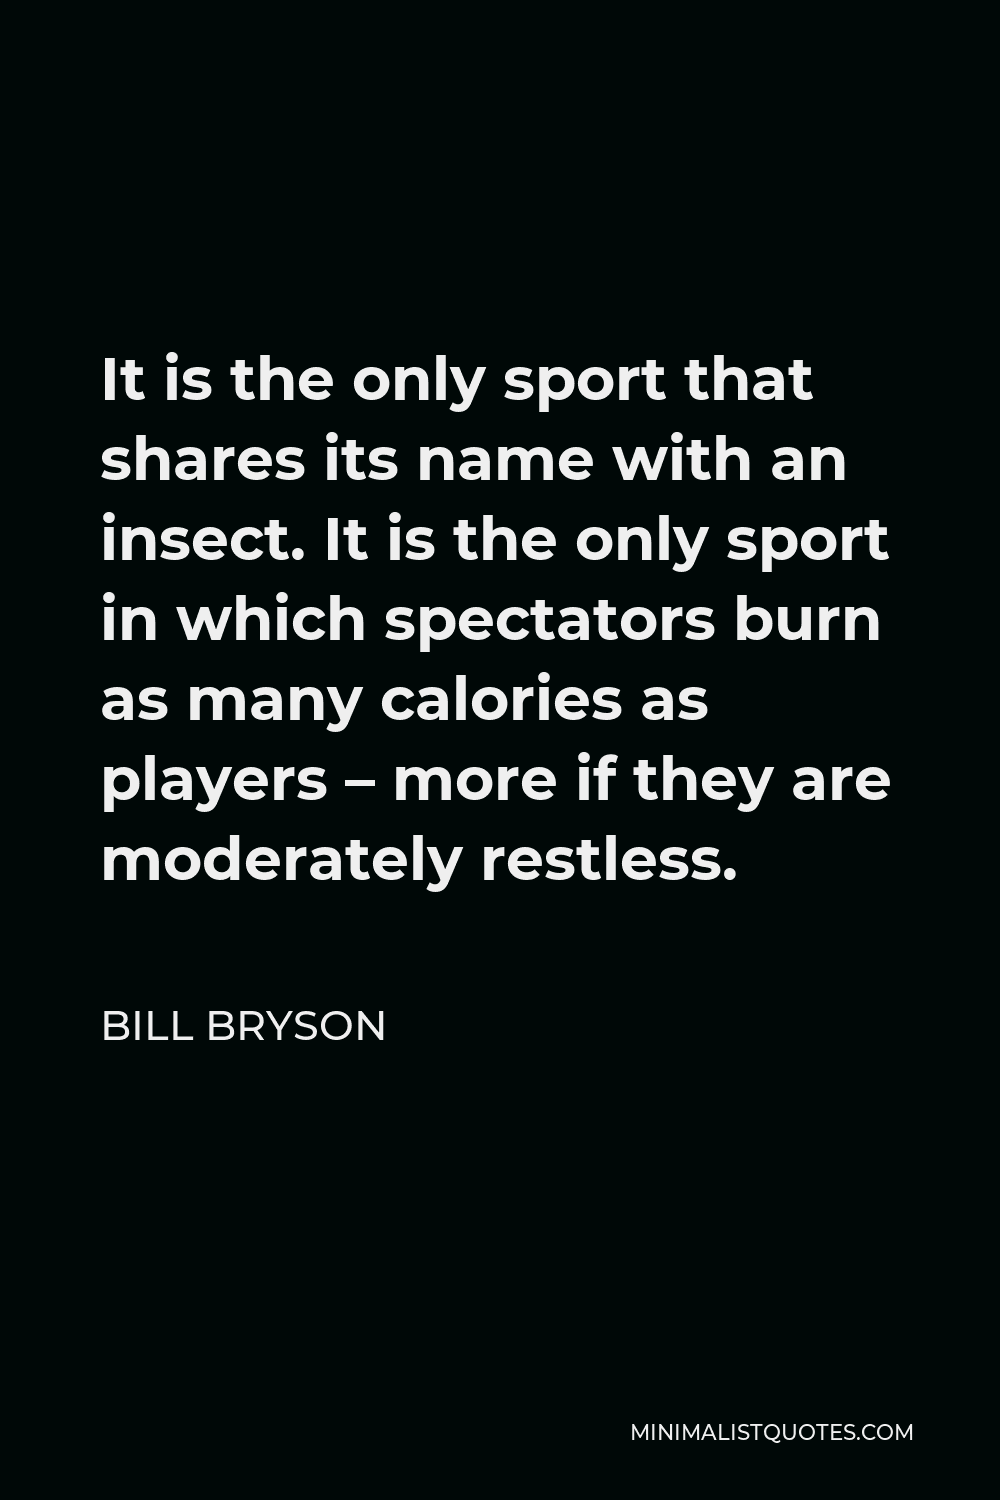 Bill Bryson Quote - It is the only sport that shares its name with an insect. It is the only sport in which spectators burn as many calories as players – more if they are moderately restless.